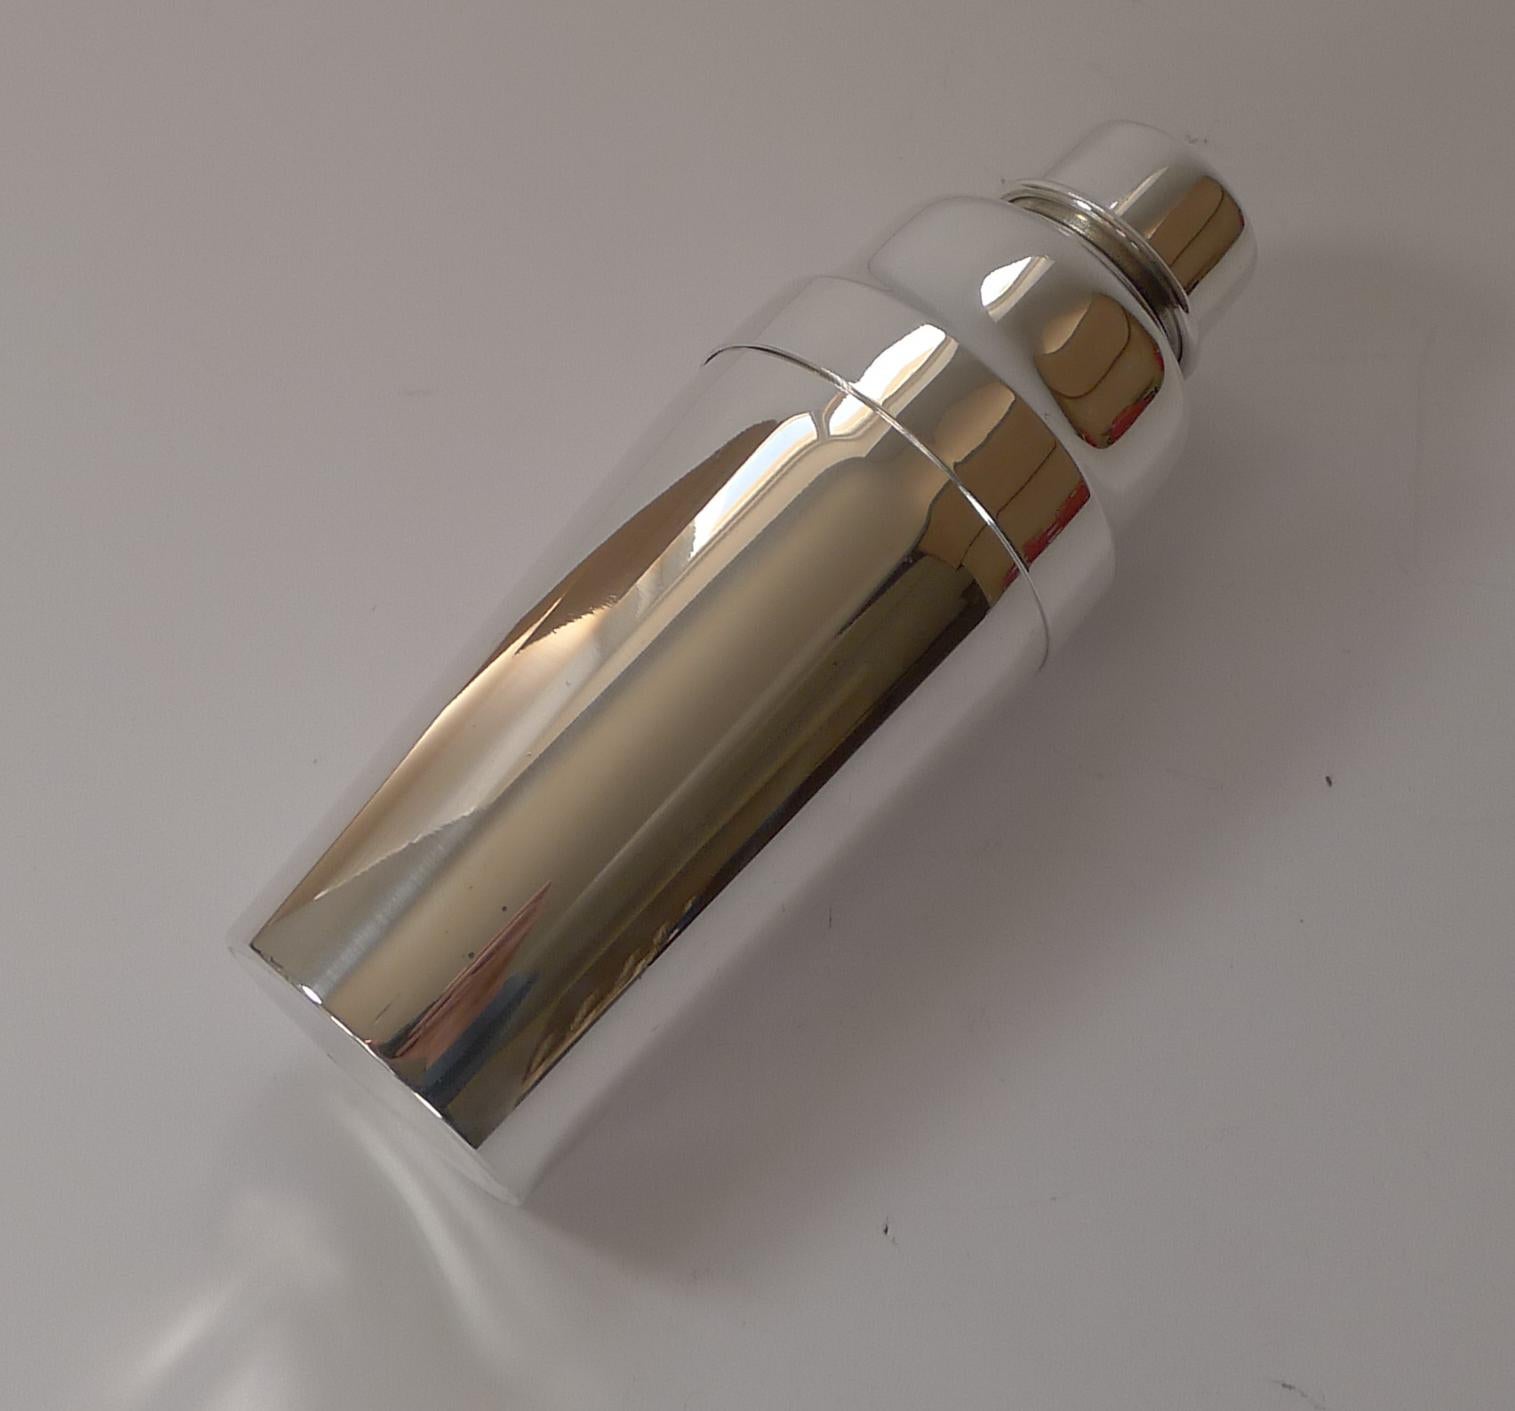 A superb French cocktail shaker just back from our silversmith's workshop having been professionally cleaned and polished returning it to its former glory dating to c.1935.

Christofle is a goldsmith and tableware company, founded in Paris in 1830